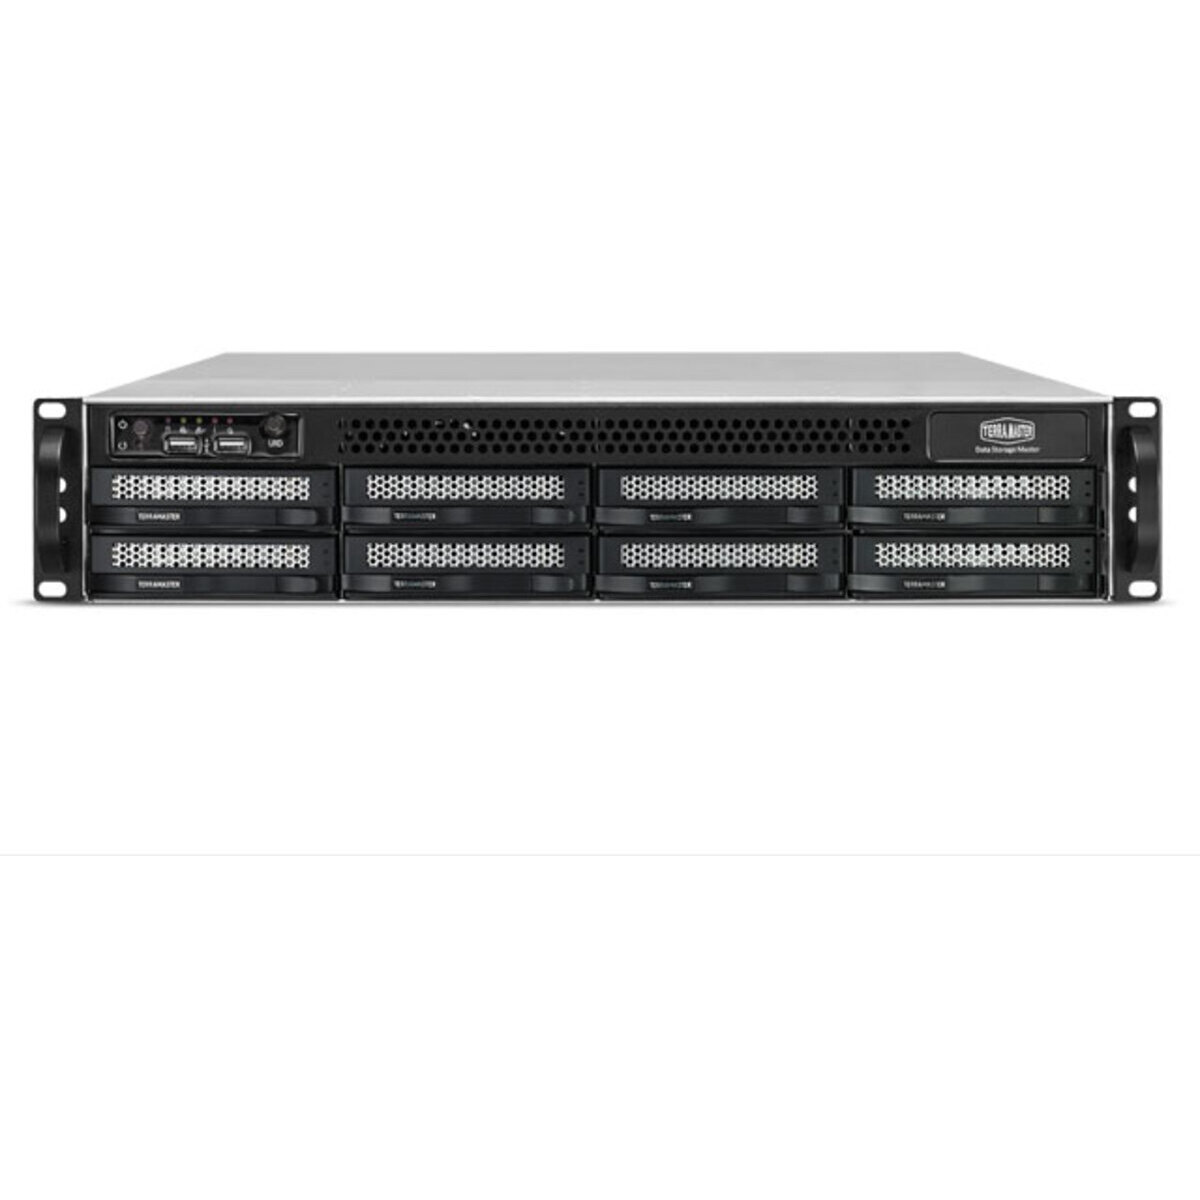 TerraMaster U8-722-2224 40tb 8-Bay RackMount Large Business / Enterprise NAS - Network Attached Storage Device 4x10tb Seagate IronWolf ST10000VN000 3.5 7200rpm SATA 6Gb/s HDD NAS Class Drives Installed - Burn-In Tested U8-722-2224